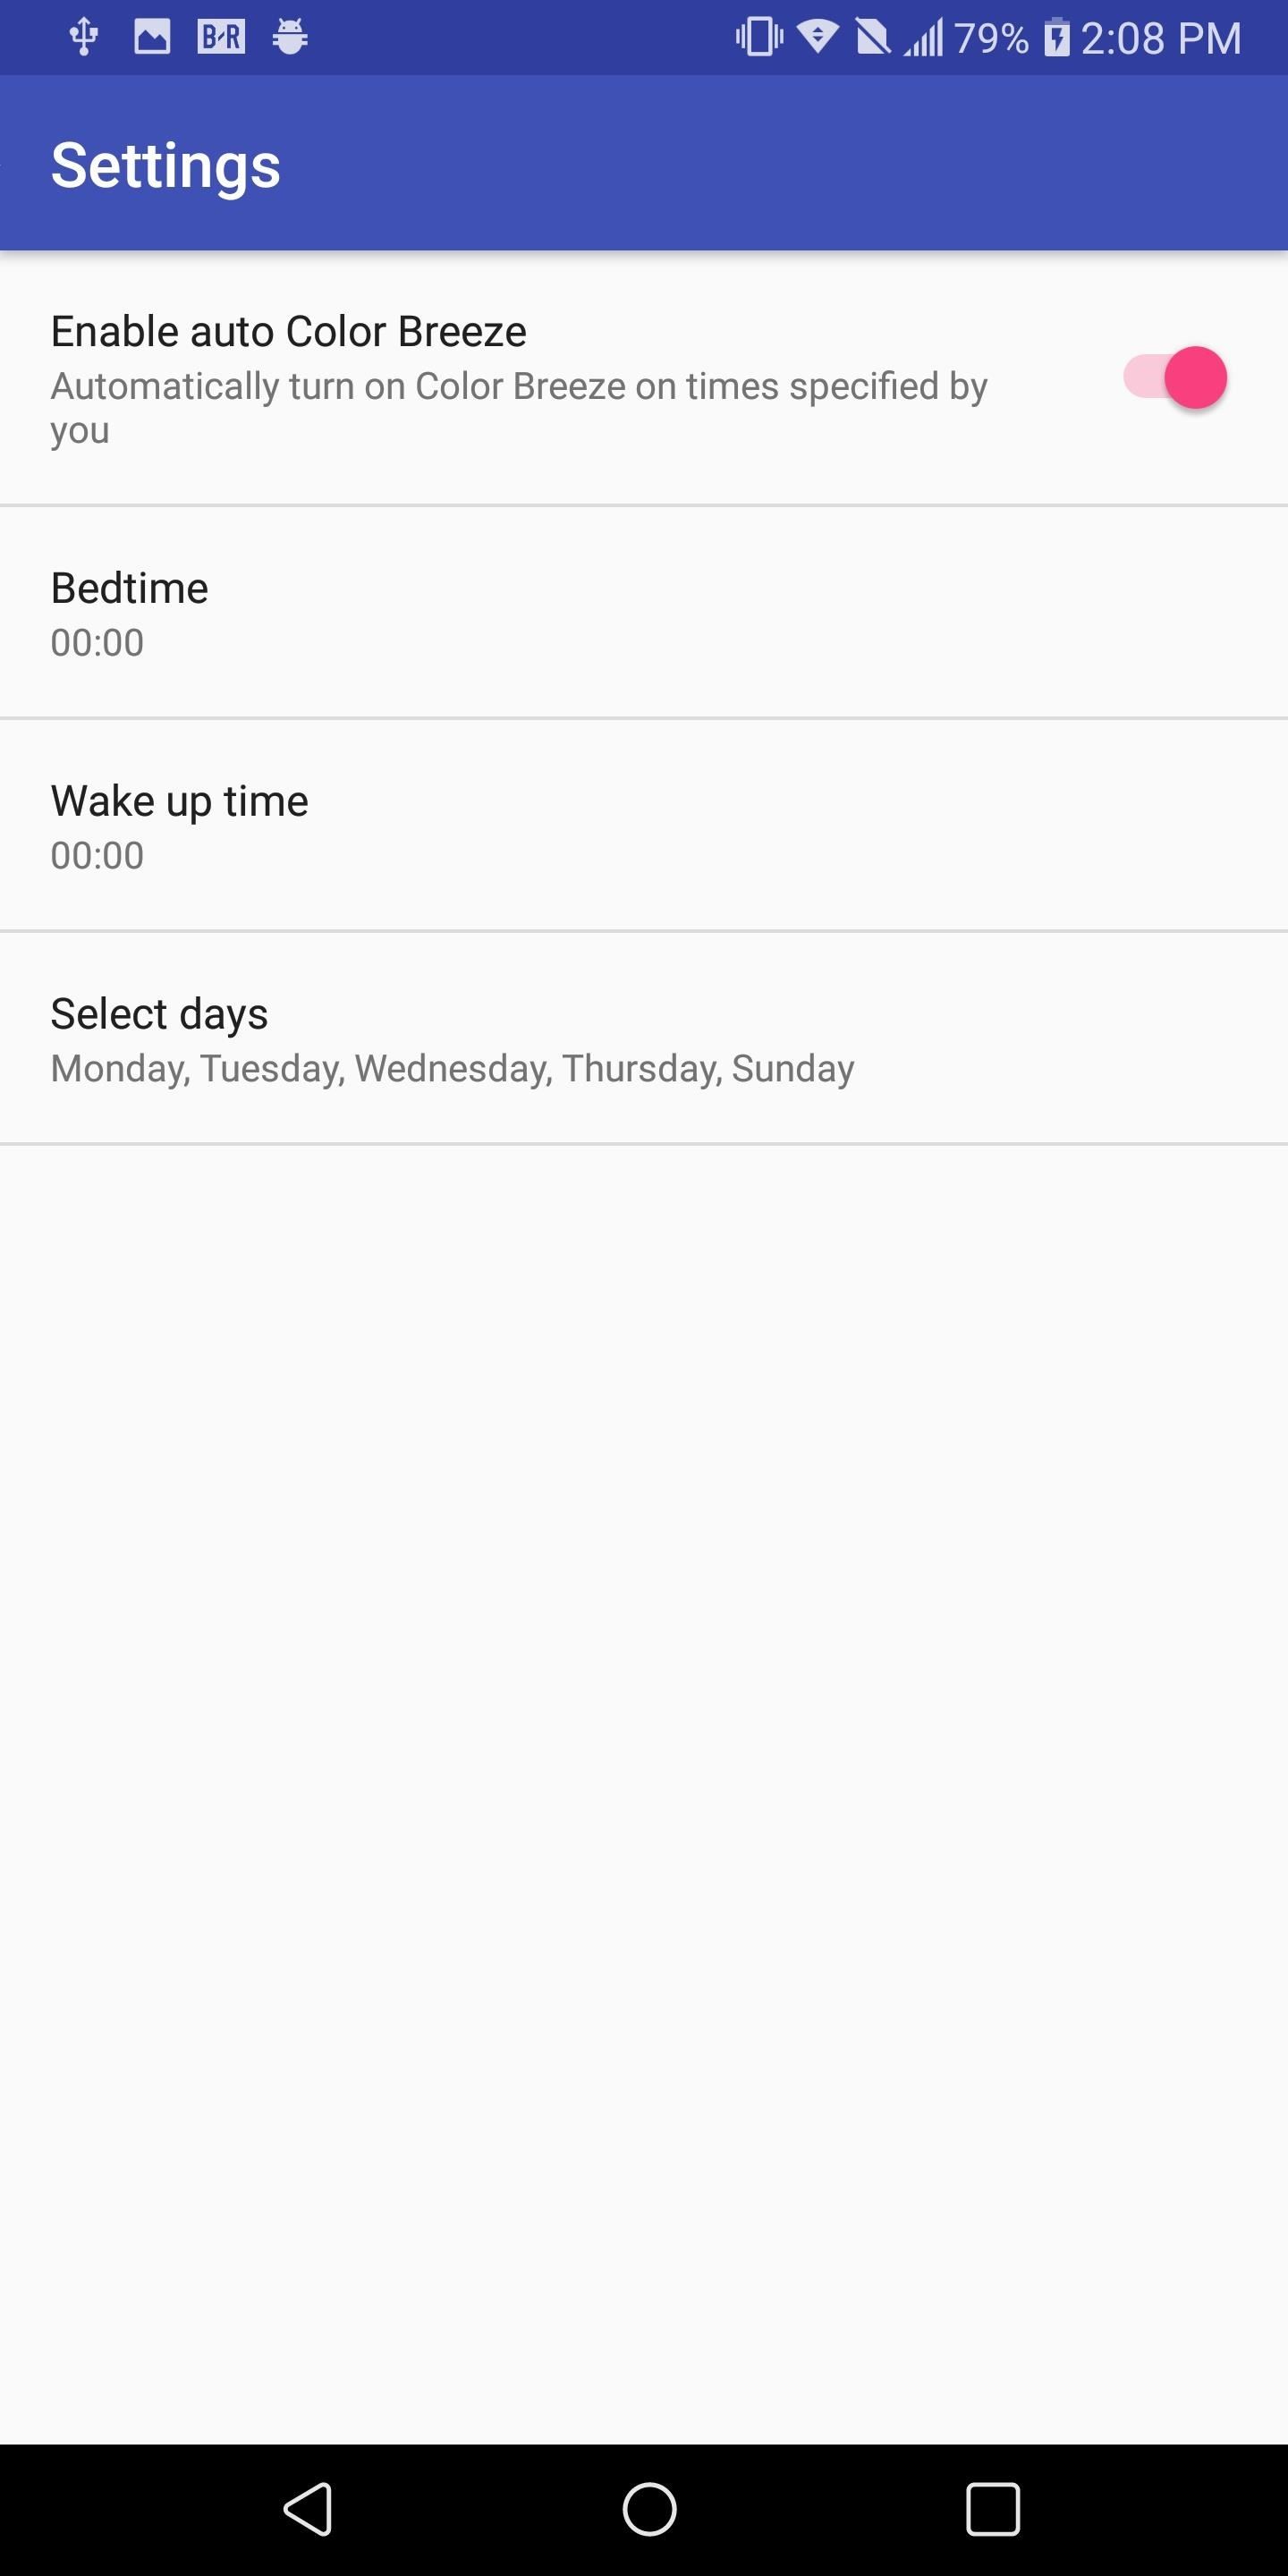 Cut Off Your Phone Addiction with Android 9.0 Pie's 'Wind Down' Mode on Any Device